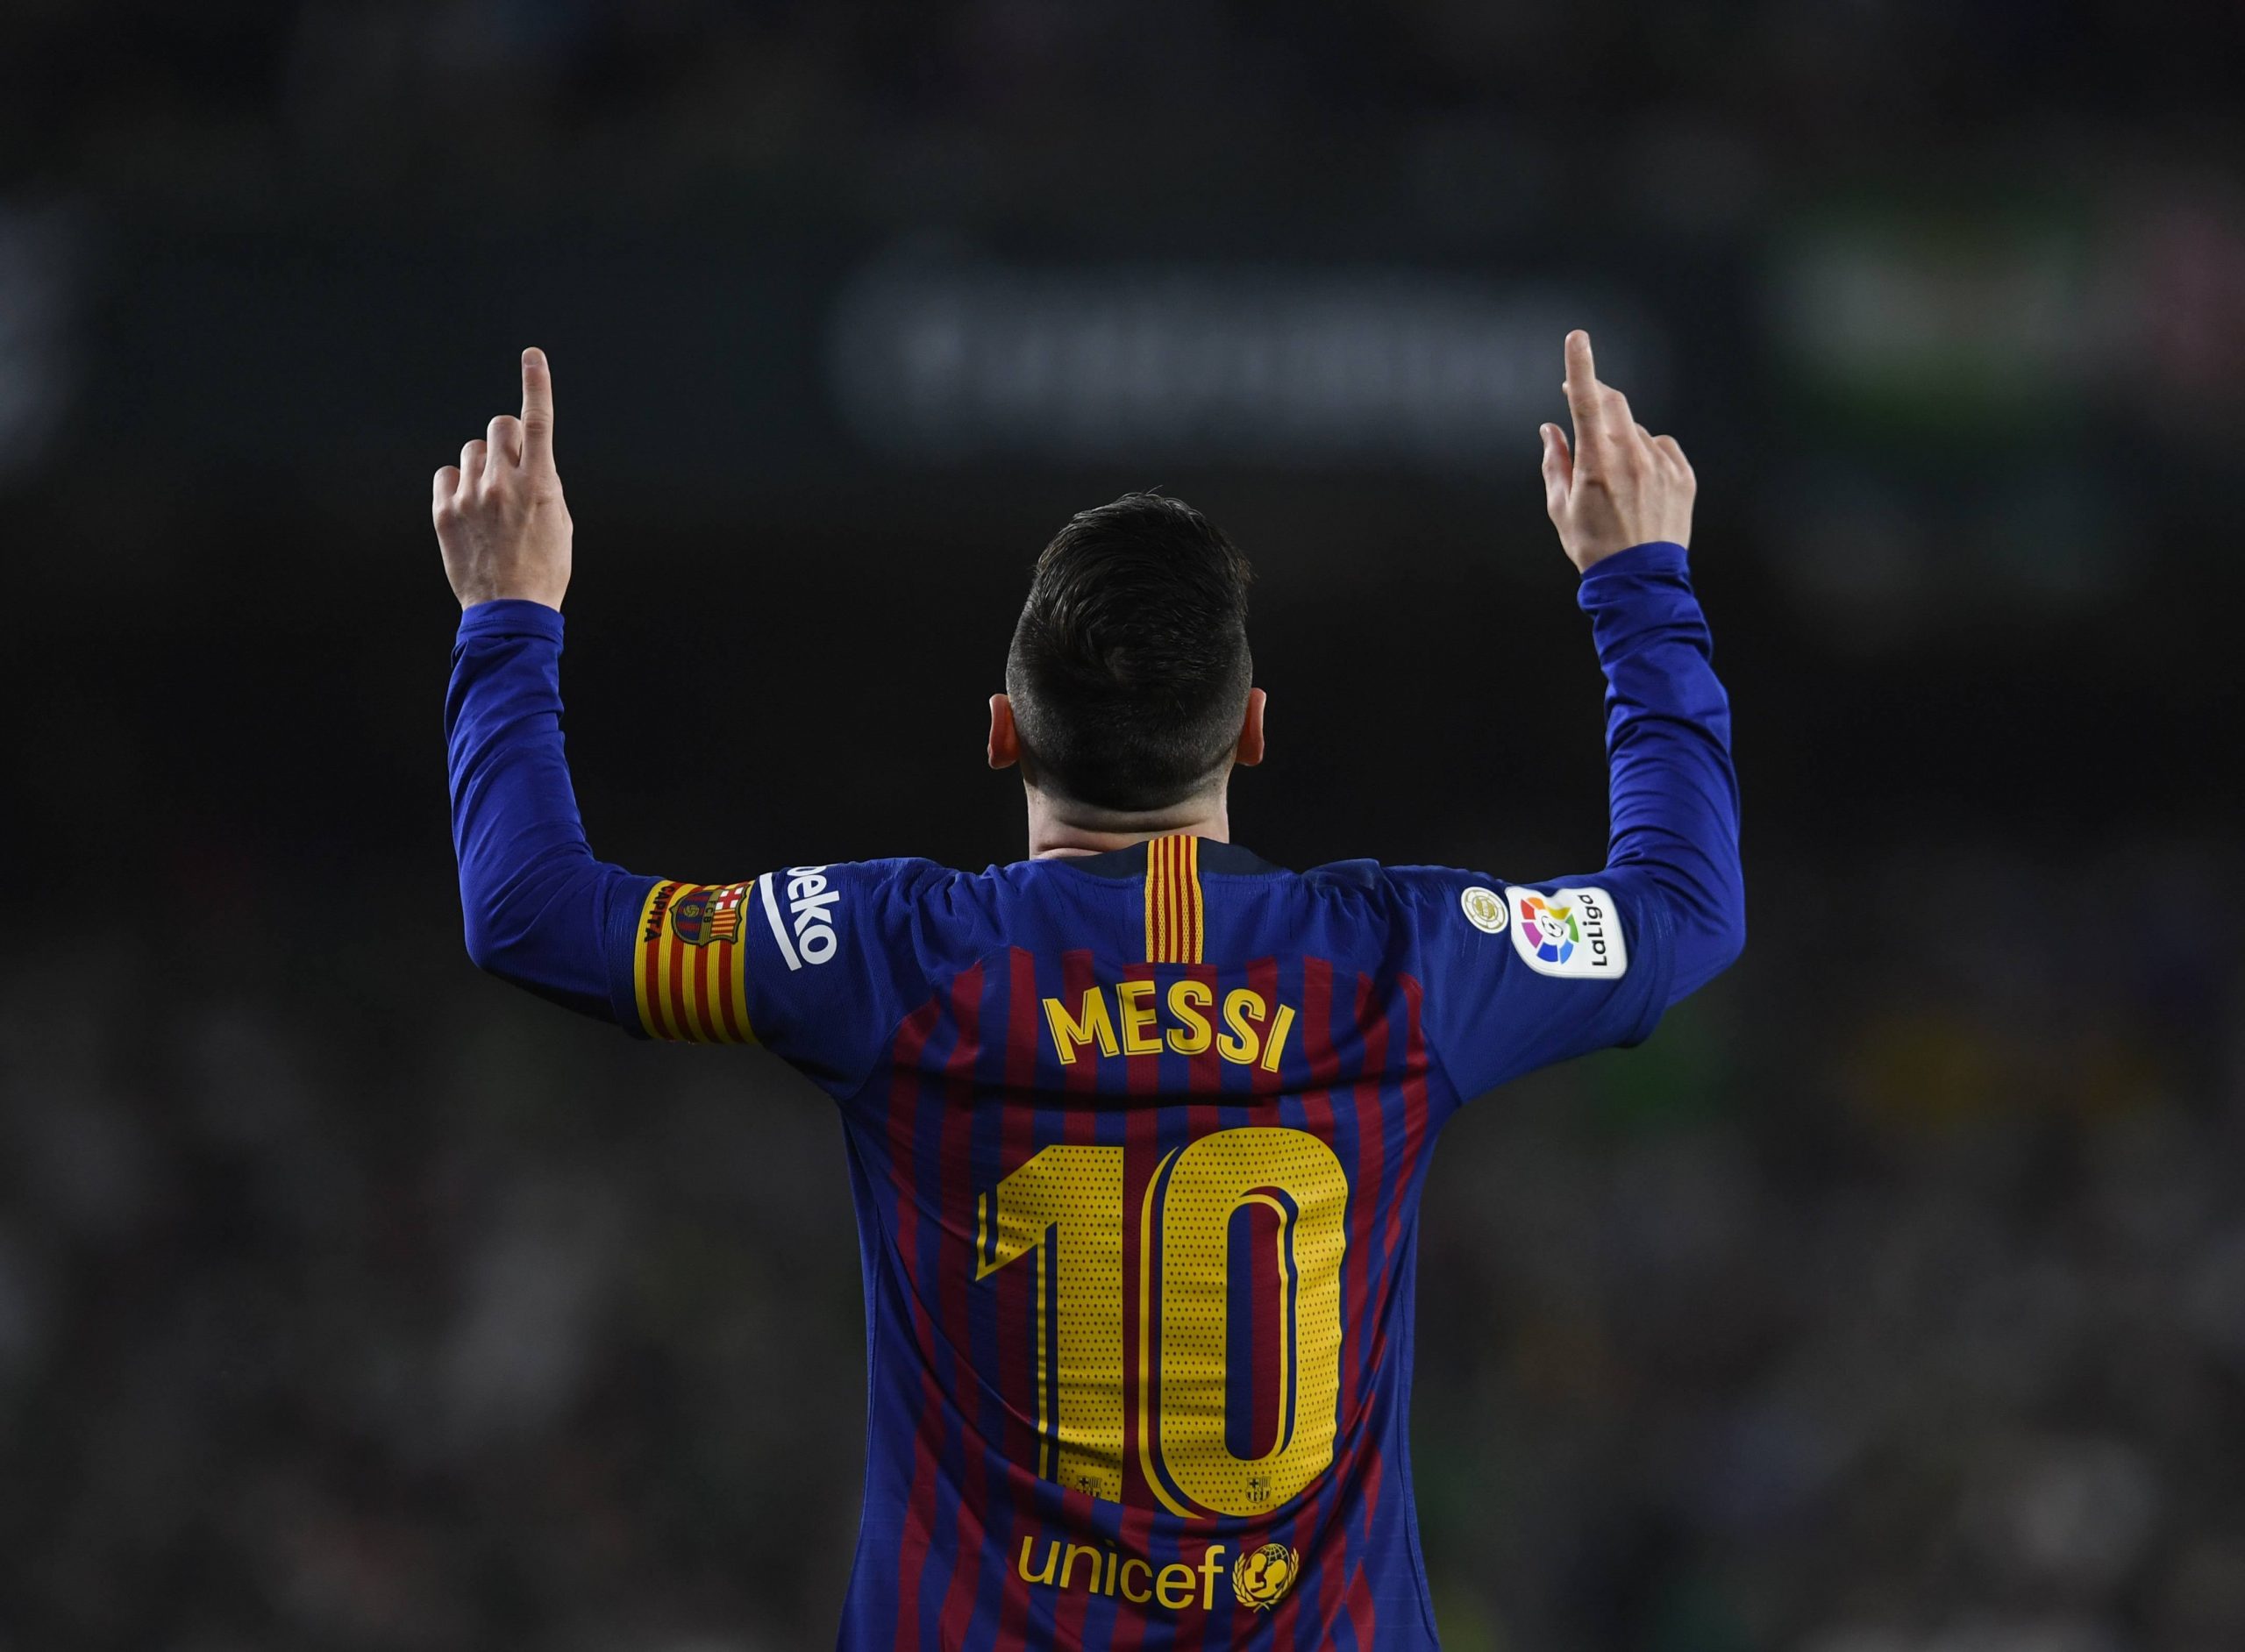 Messi Moments with Álex Delmás: Real Betis 1 – 4 Barcelona, March 2019